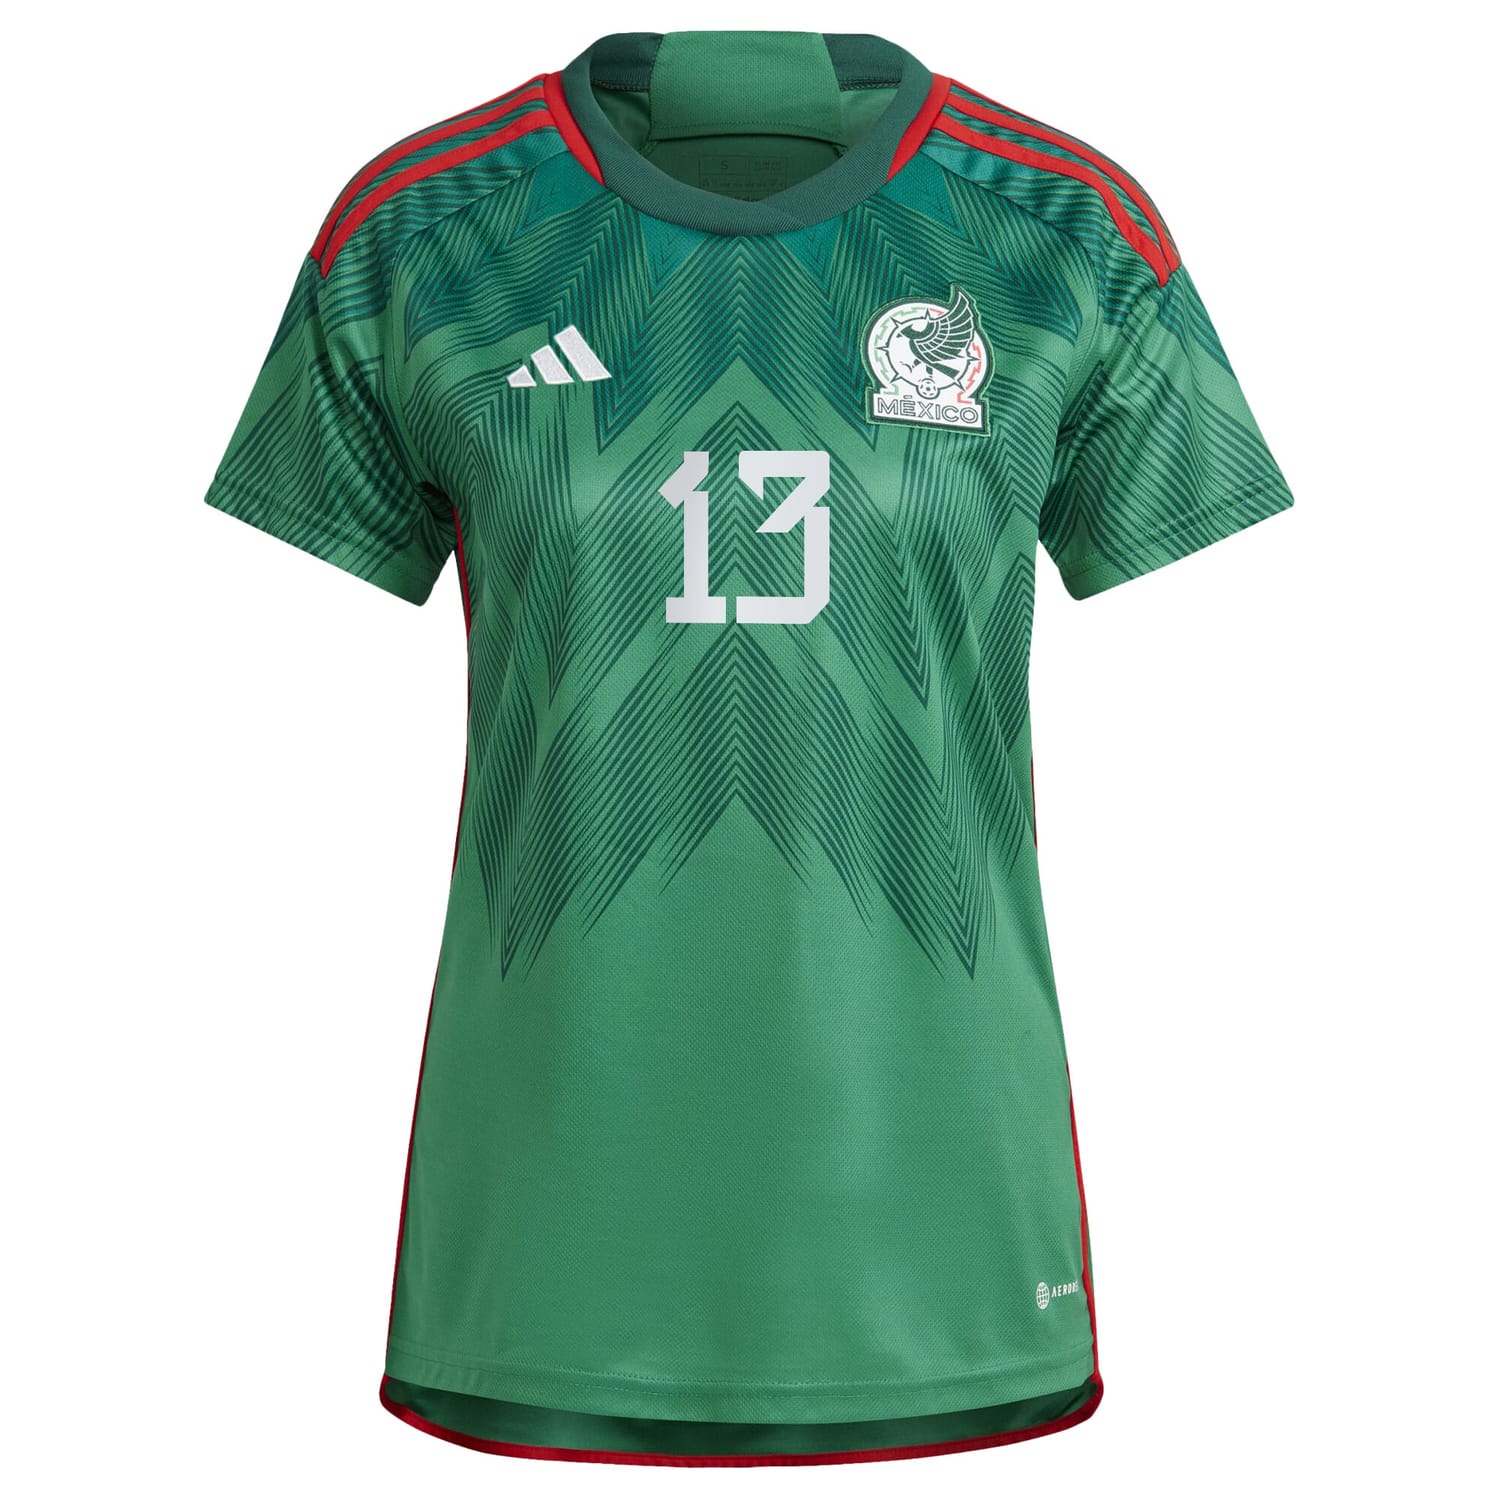 Mexico National Team Home Jersey Shirt Green 2022-23 player Guillermo Ochoa printing for Women